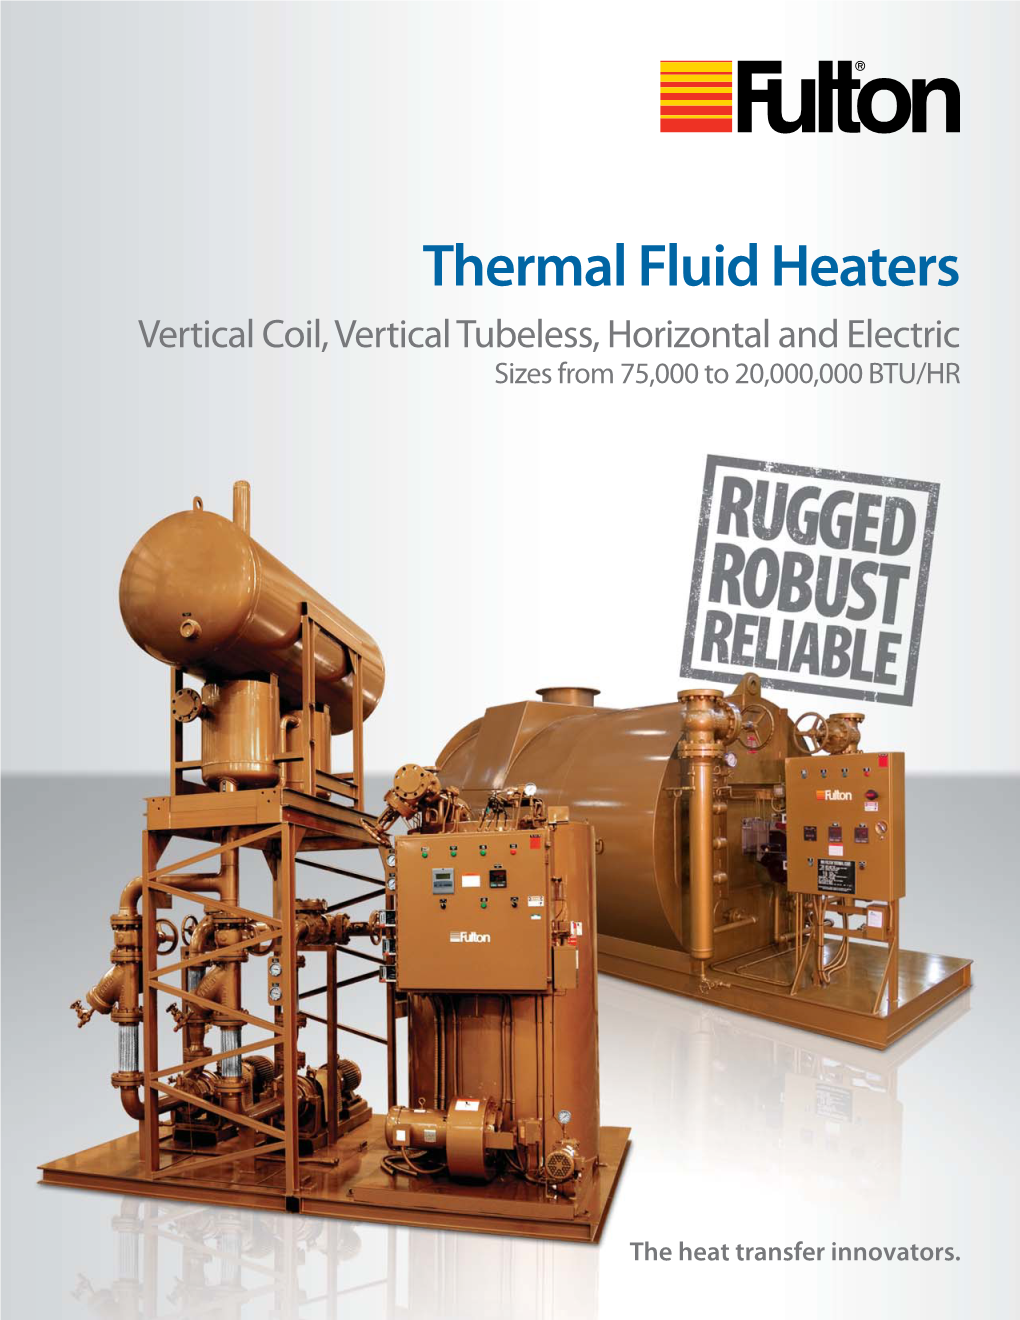 Thermal Fluid Heaters Vertical Coil, Vertical Tubeless, Horizontal and Electric Sizes from 75,000 to 20,000,000 BTU/HR